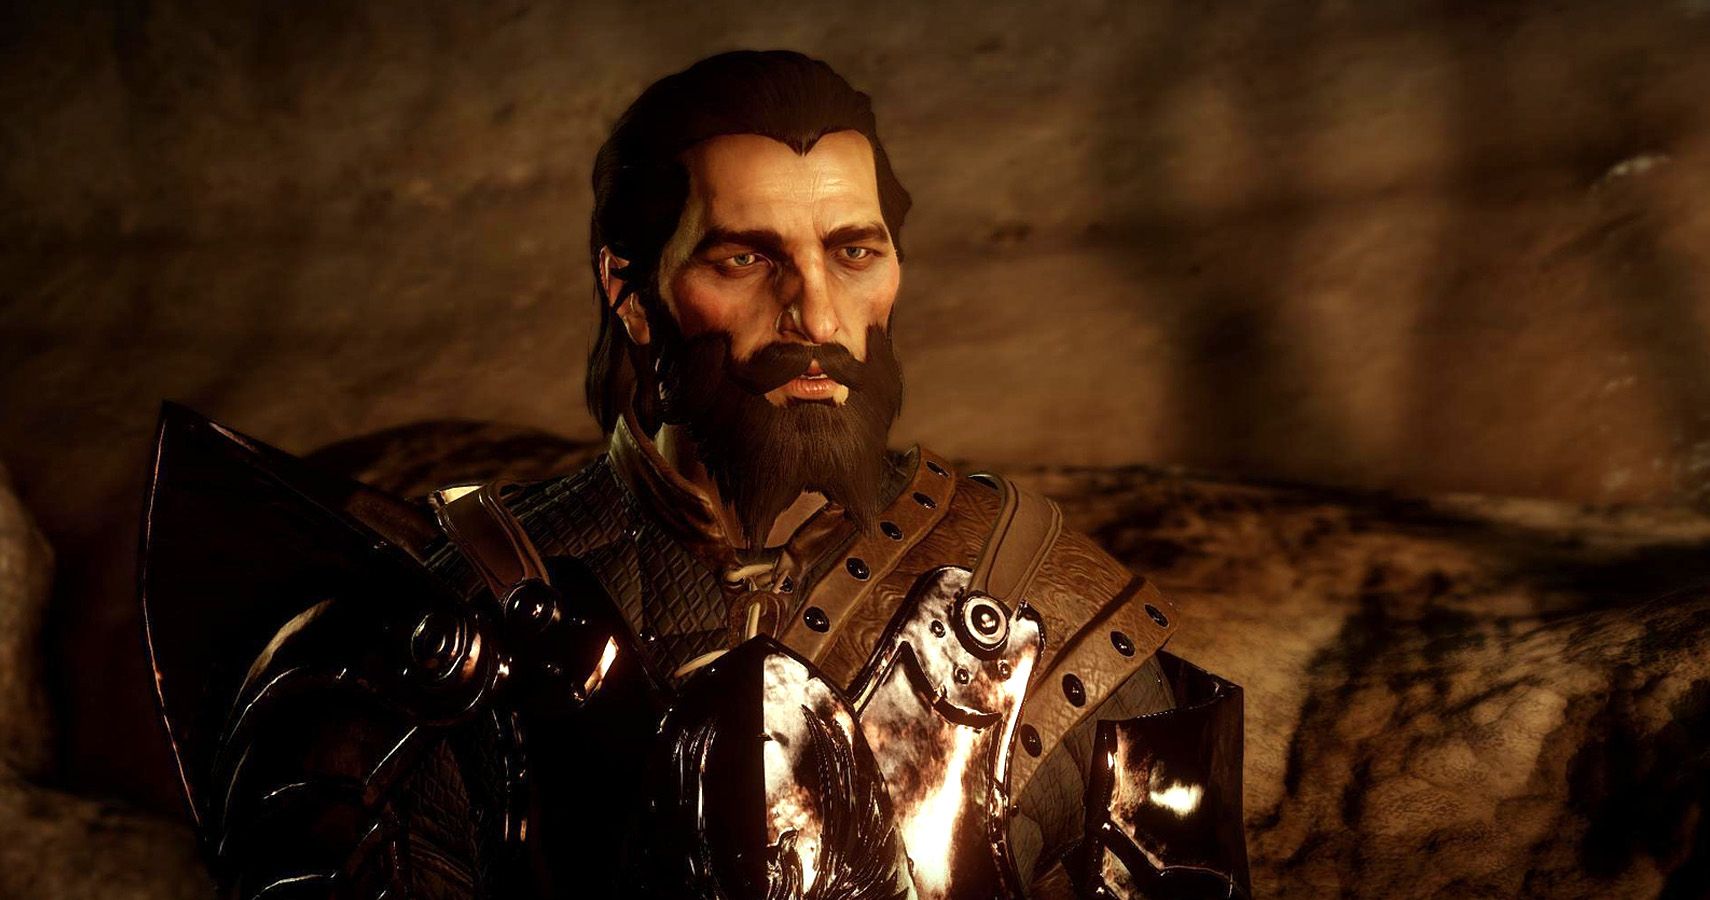 The Warden Blackwall in Dragon Age: Inquisition